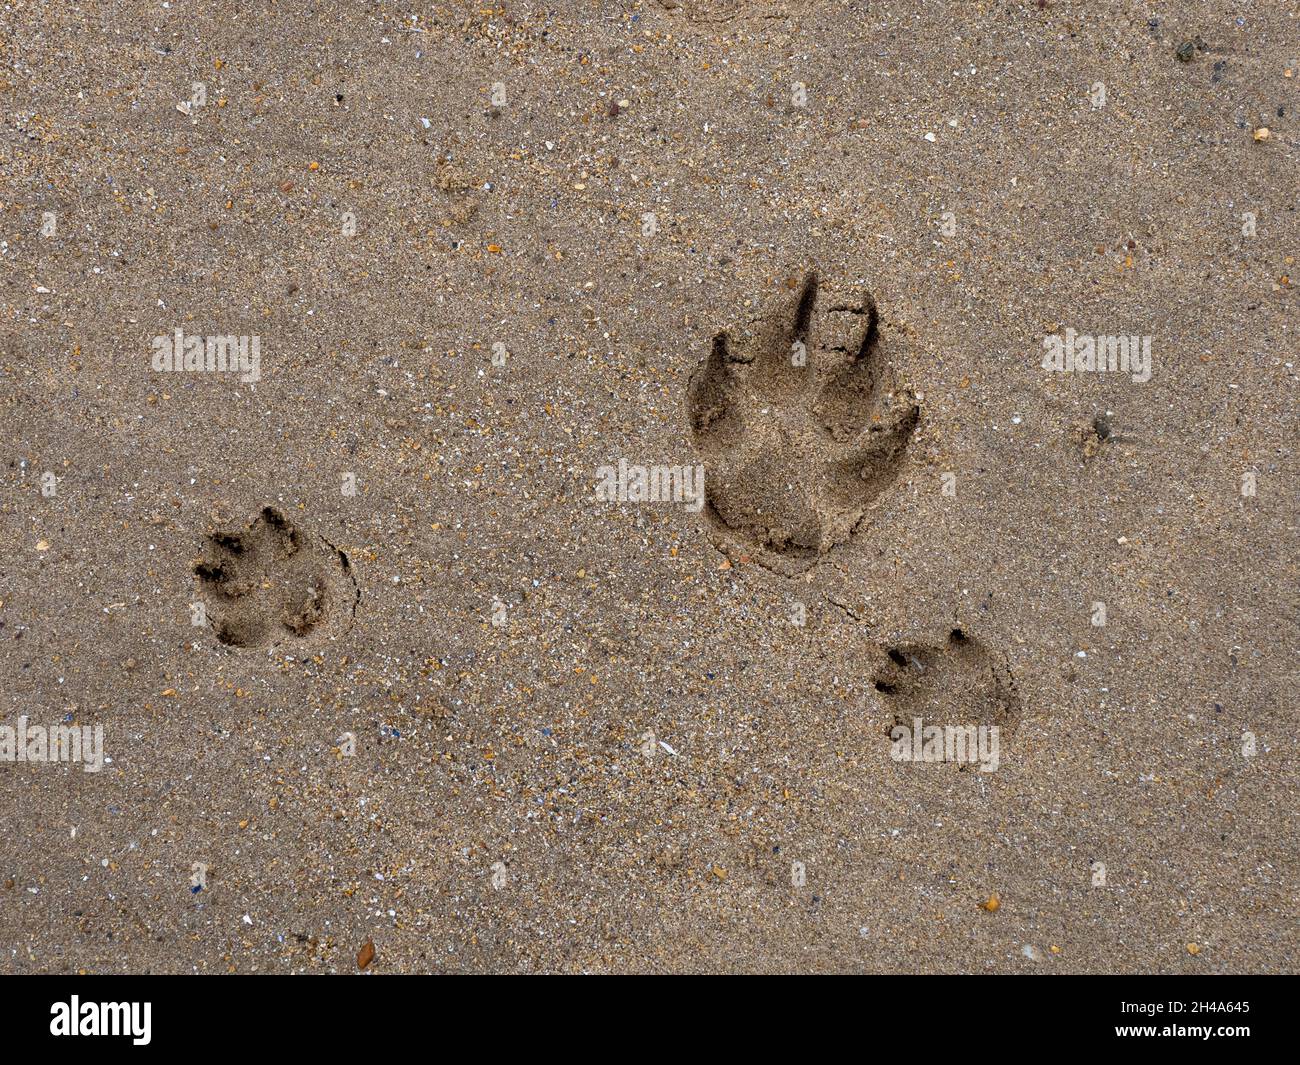 Paw prints on beach of two different dogs Stock Photo